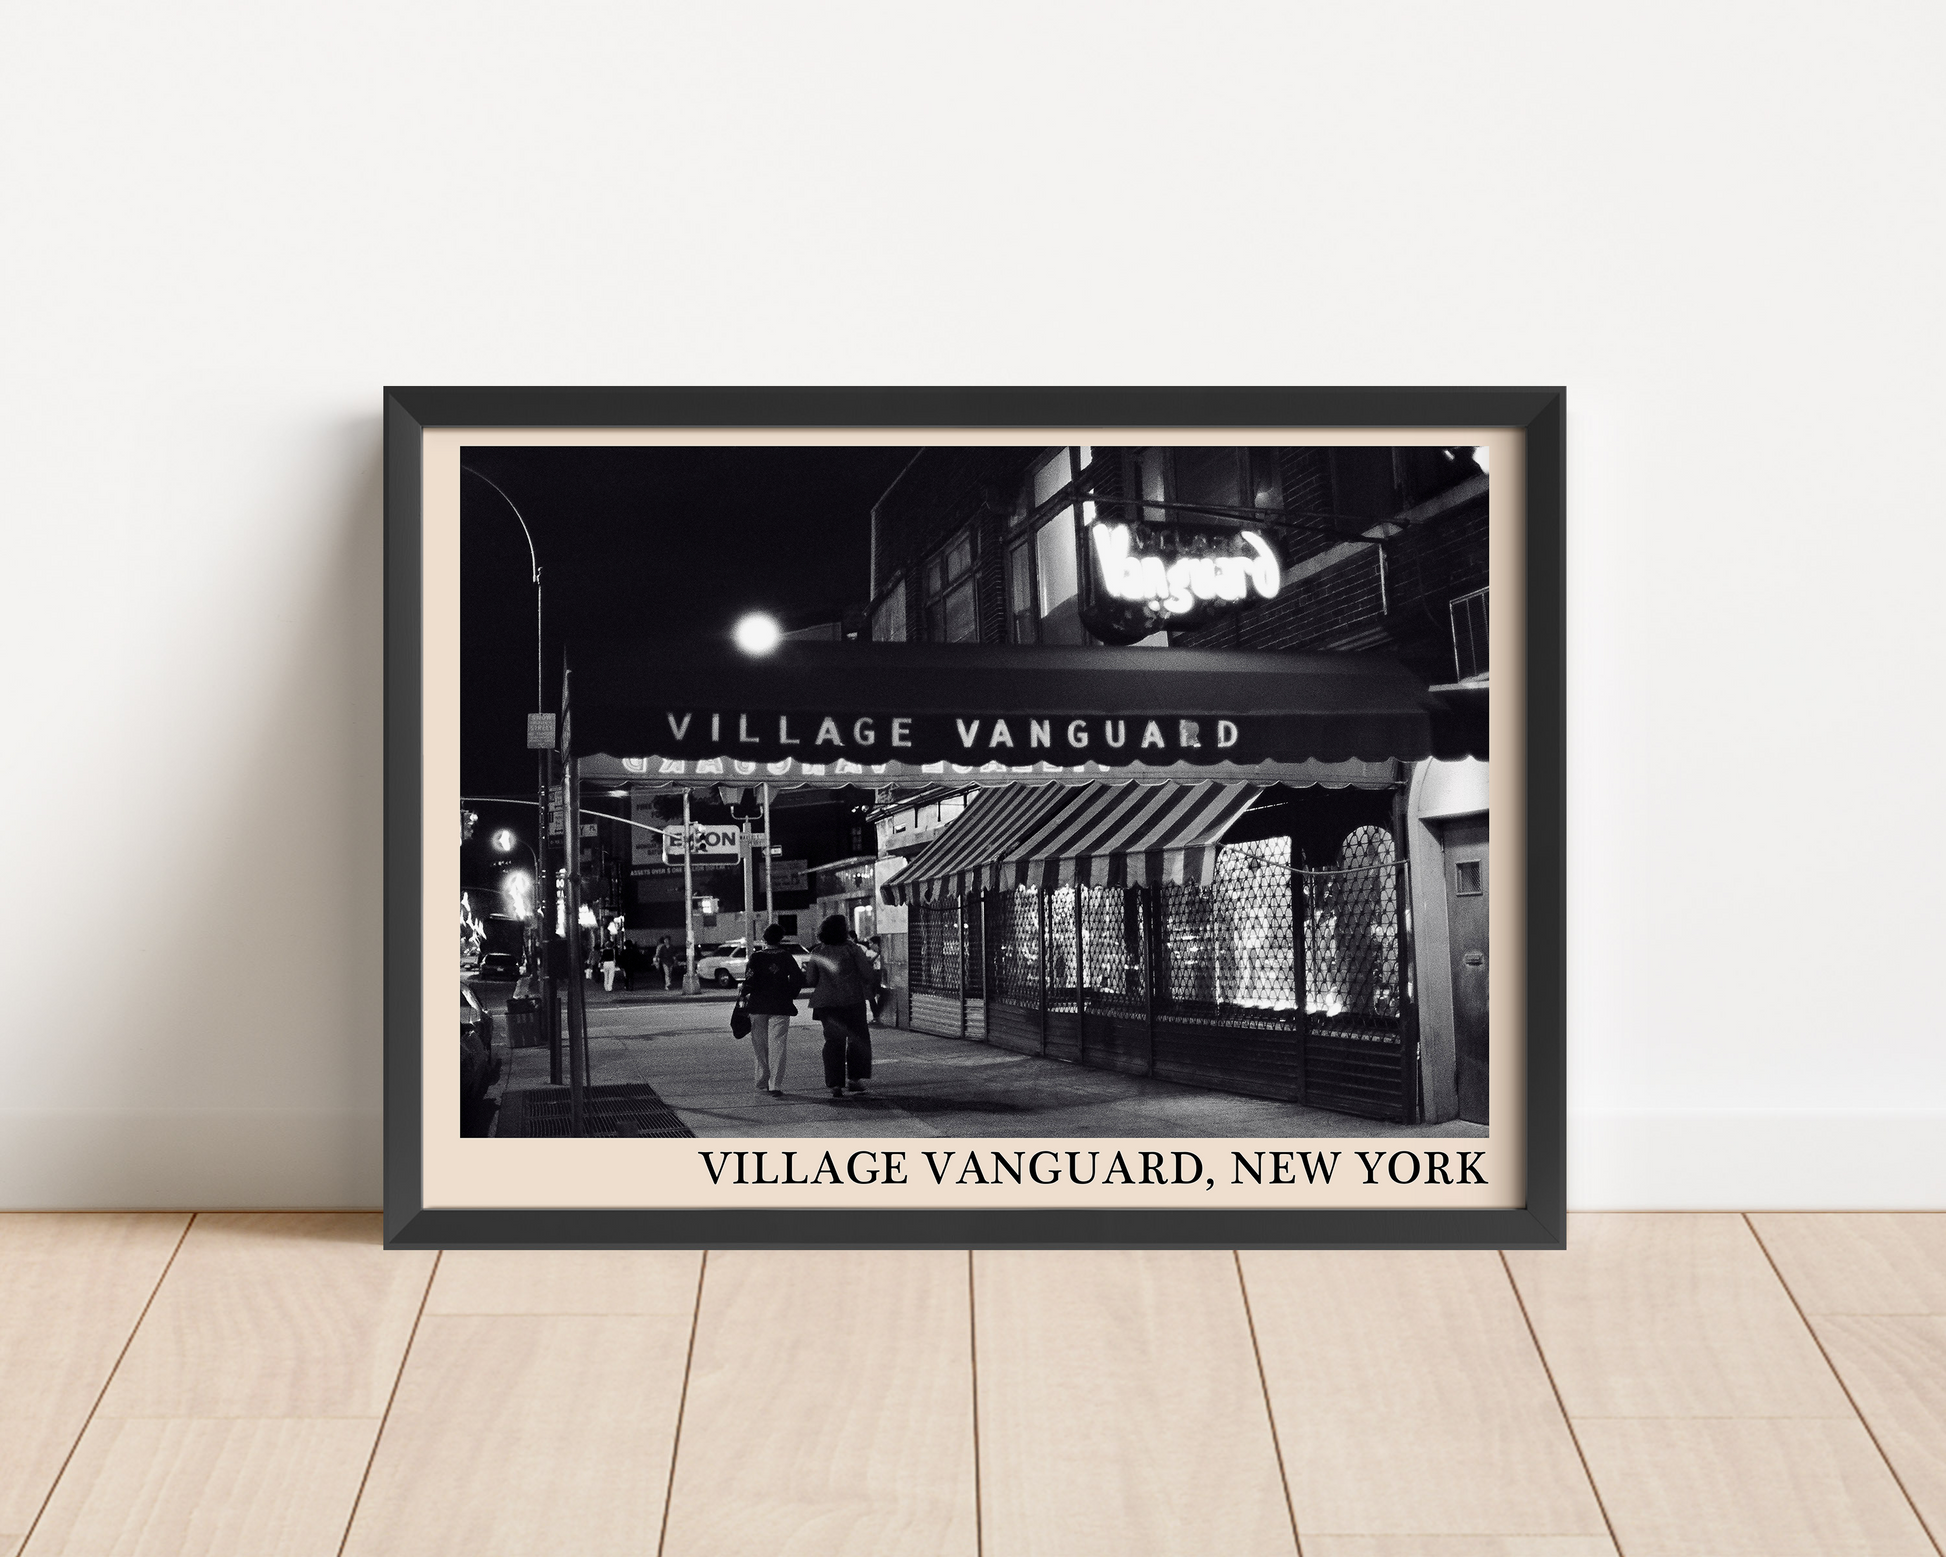 Iconic photo of Village Vanguard in New York taken by Thomas Marcello and captured in a retro black framed jazz poster, leaning against a white wall